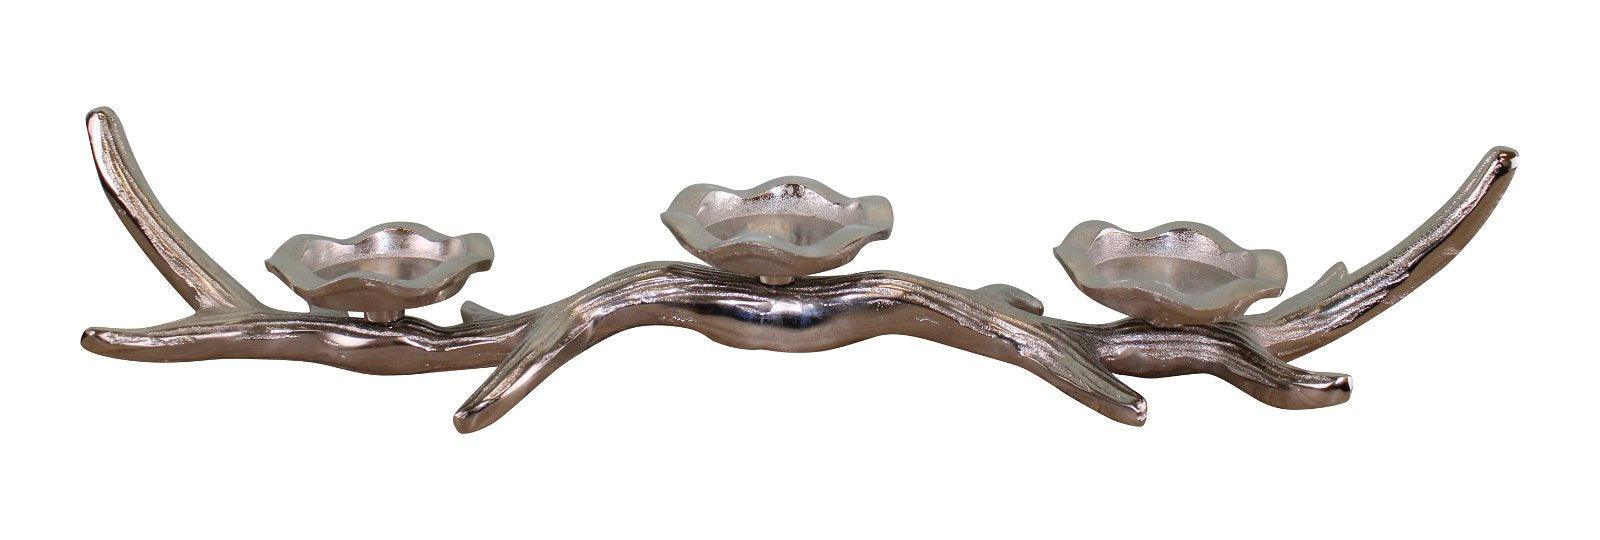 3 Piece Silver Metal Antler Candle Holder - Lost Land Interiors